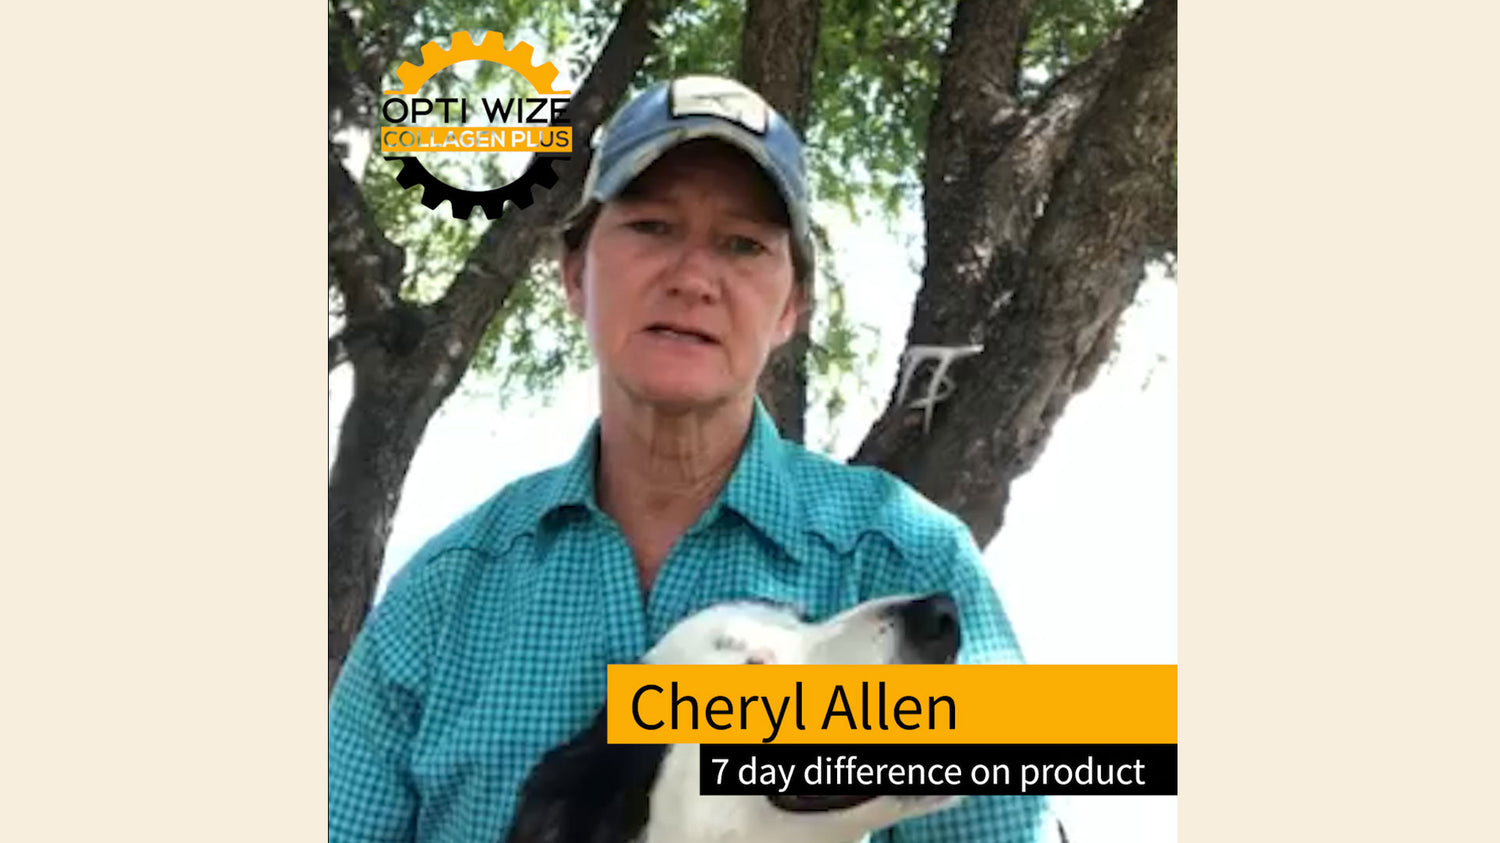 <p>Hear why Cheryl chose OptiWize as her go to dog arthritis supplement. Coccidioidomycosis can vary painful depending on whether your dog has a mild or severe infection. Arthritic flare ups and cartilage breakdown is the progression of the disease. Cheryl sees the astounding changes in her dog. Please have a listen to her story.</p>